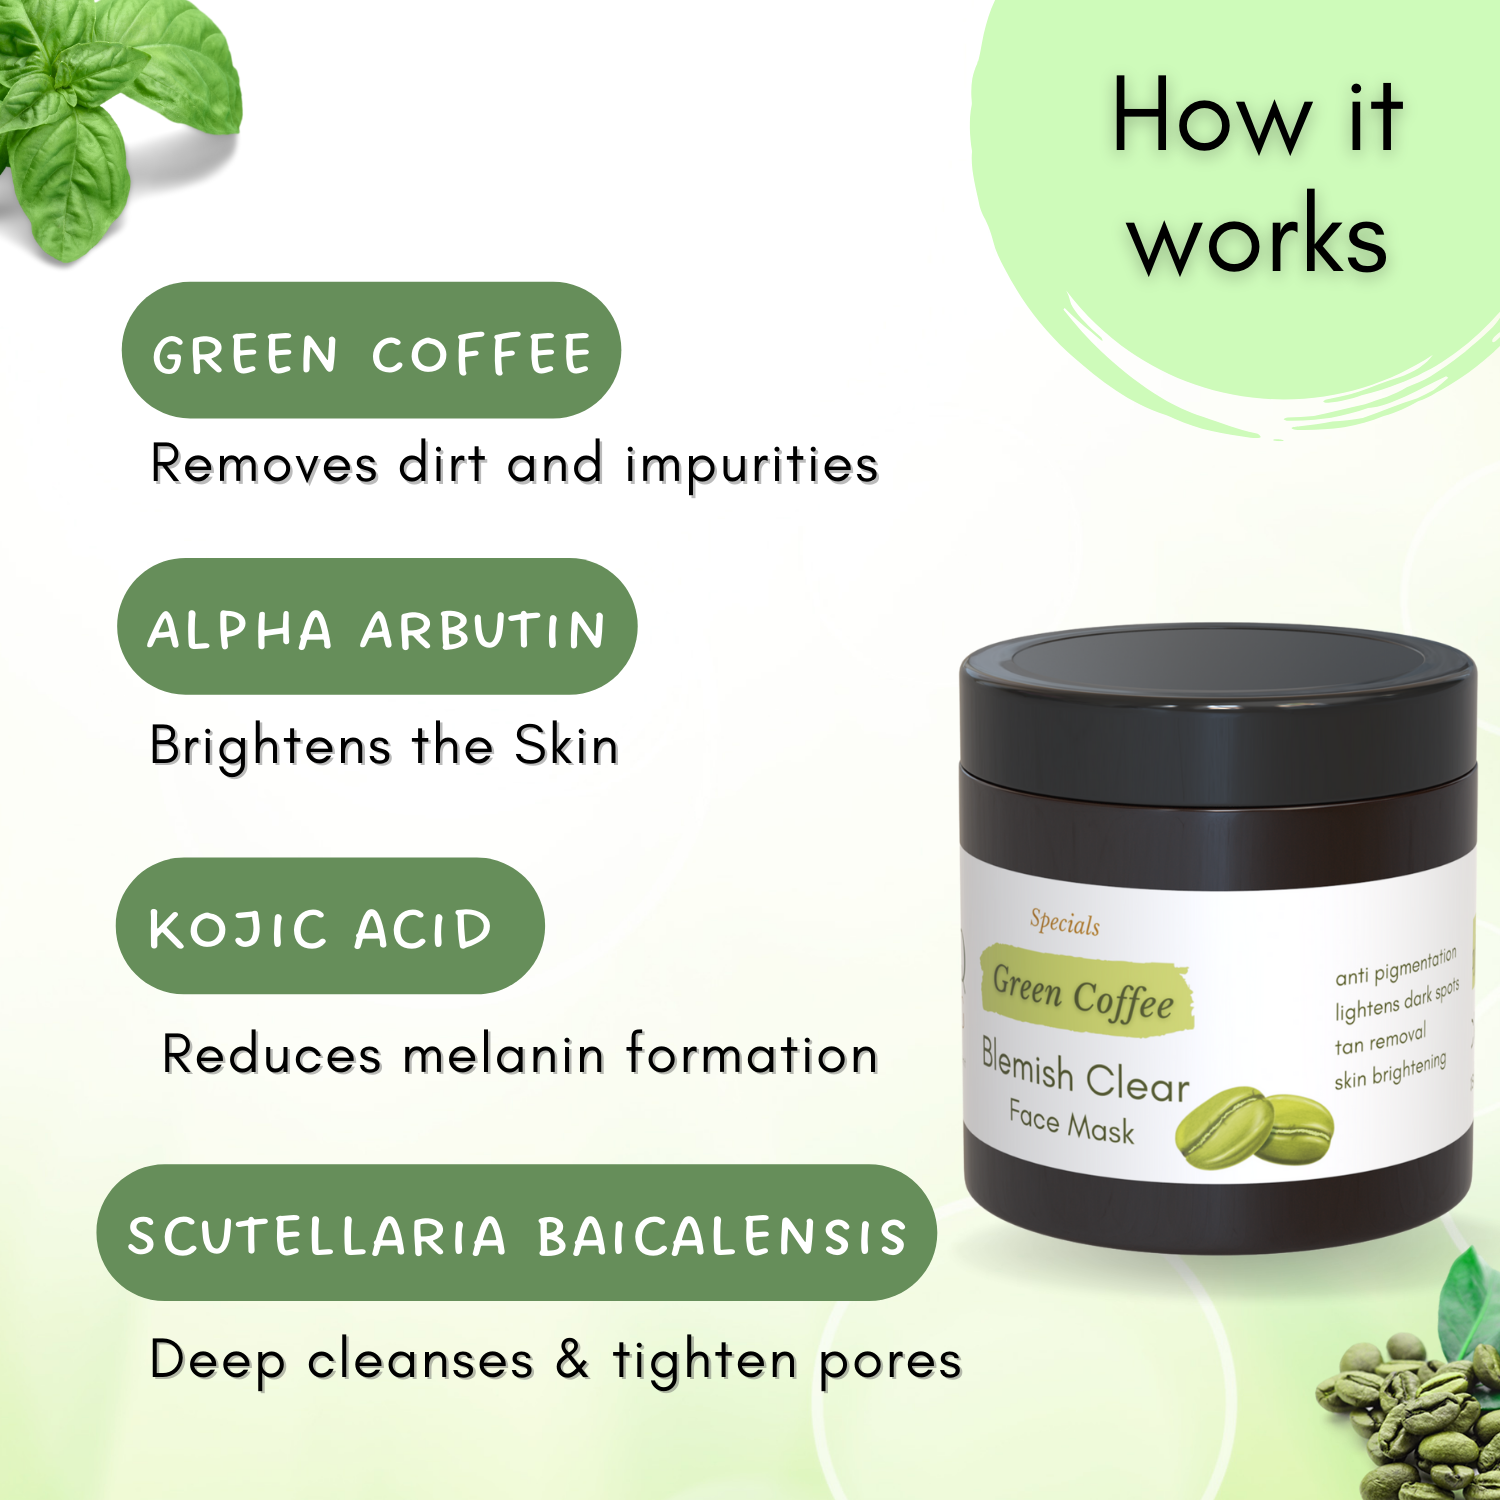 Green Coffee Blemish Clear Face Pack/Mask for Brightening, Tan Removal and Glowing Skin